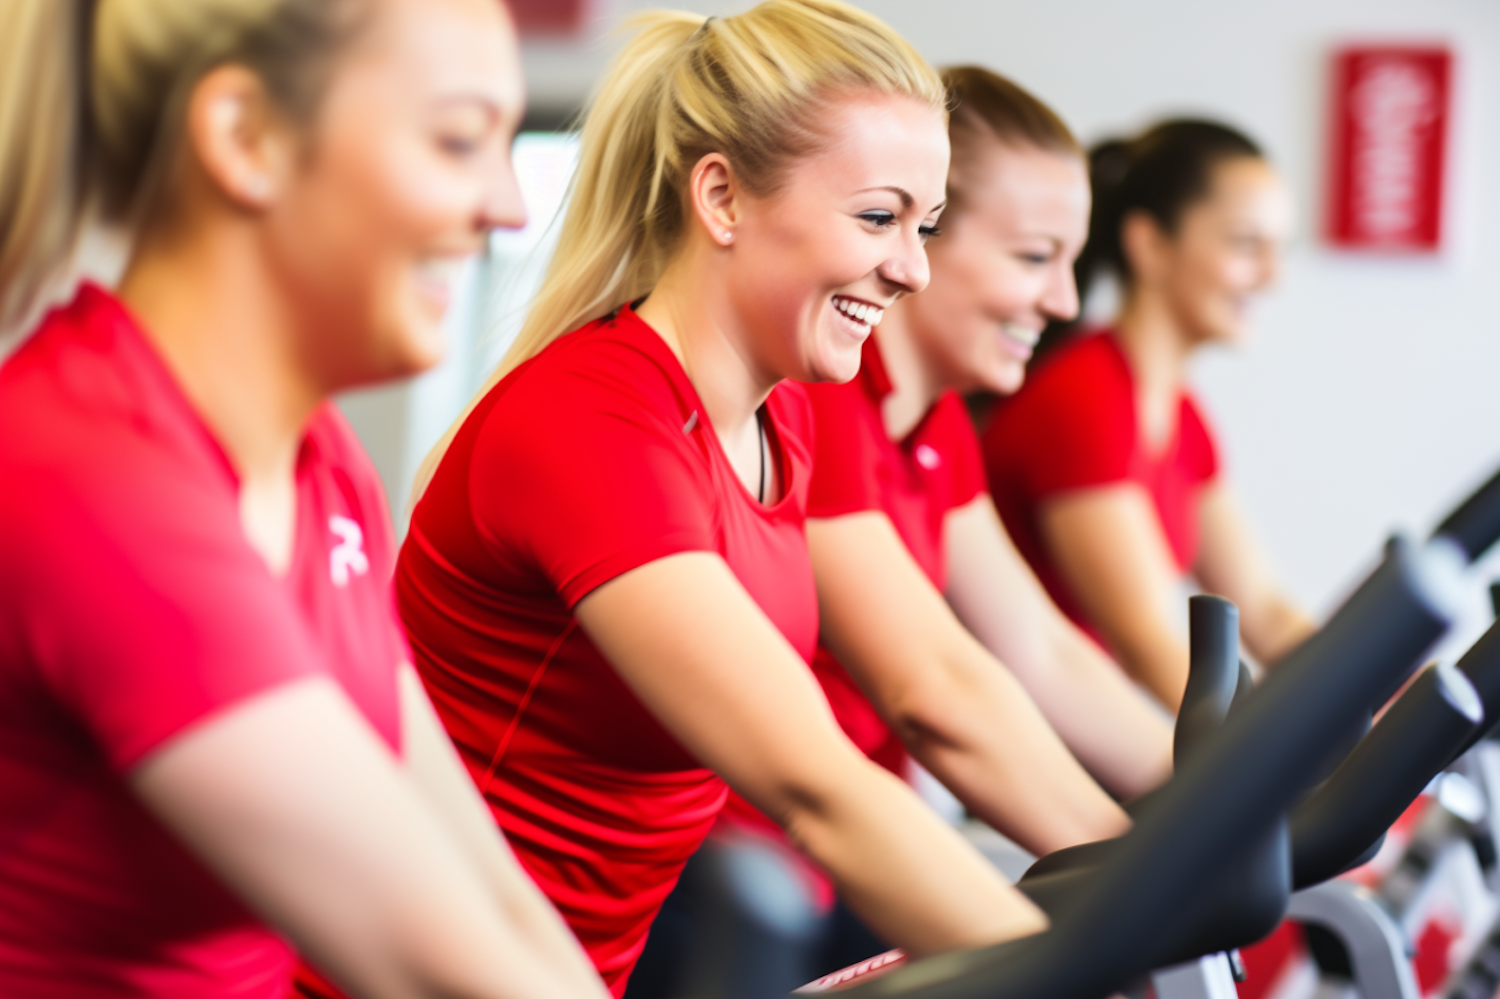 Energetic Fitness Class with Smiling Woman in Red